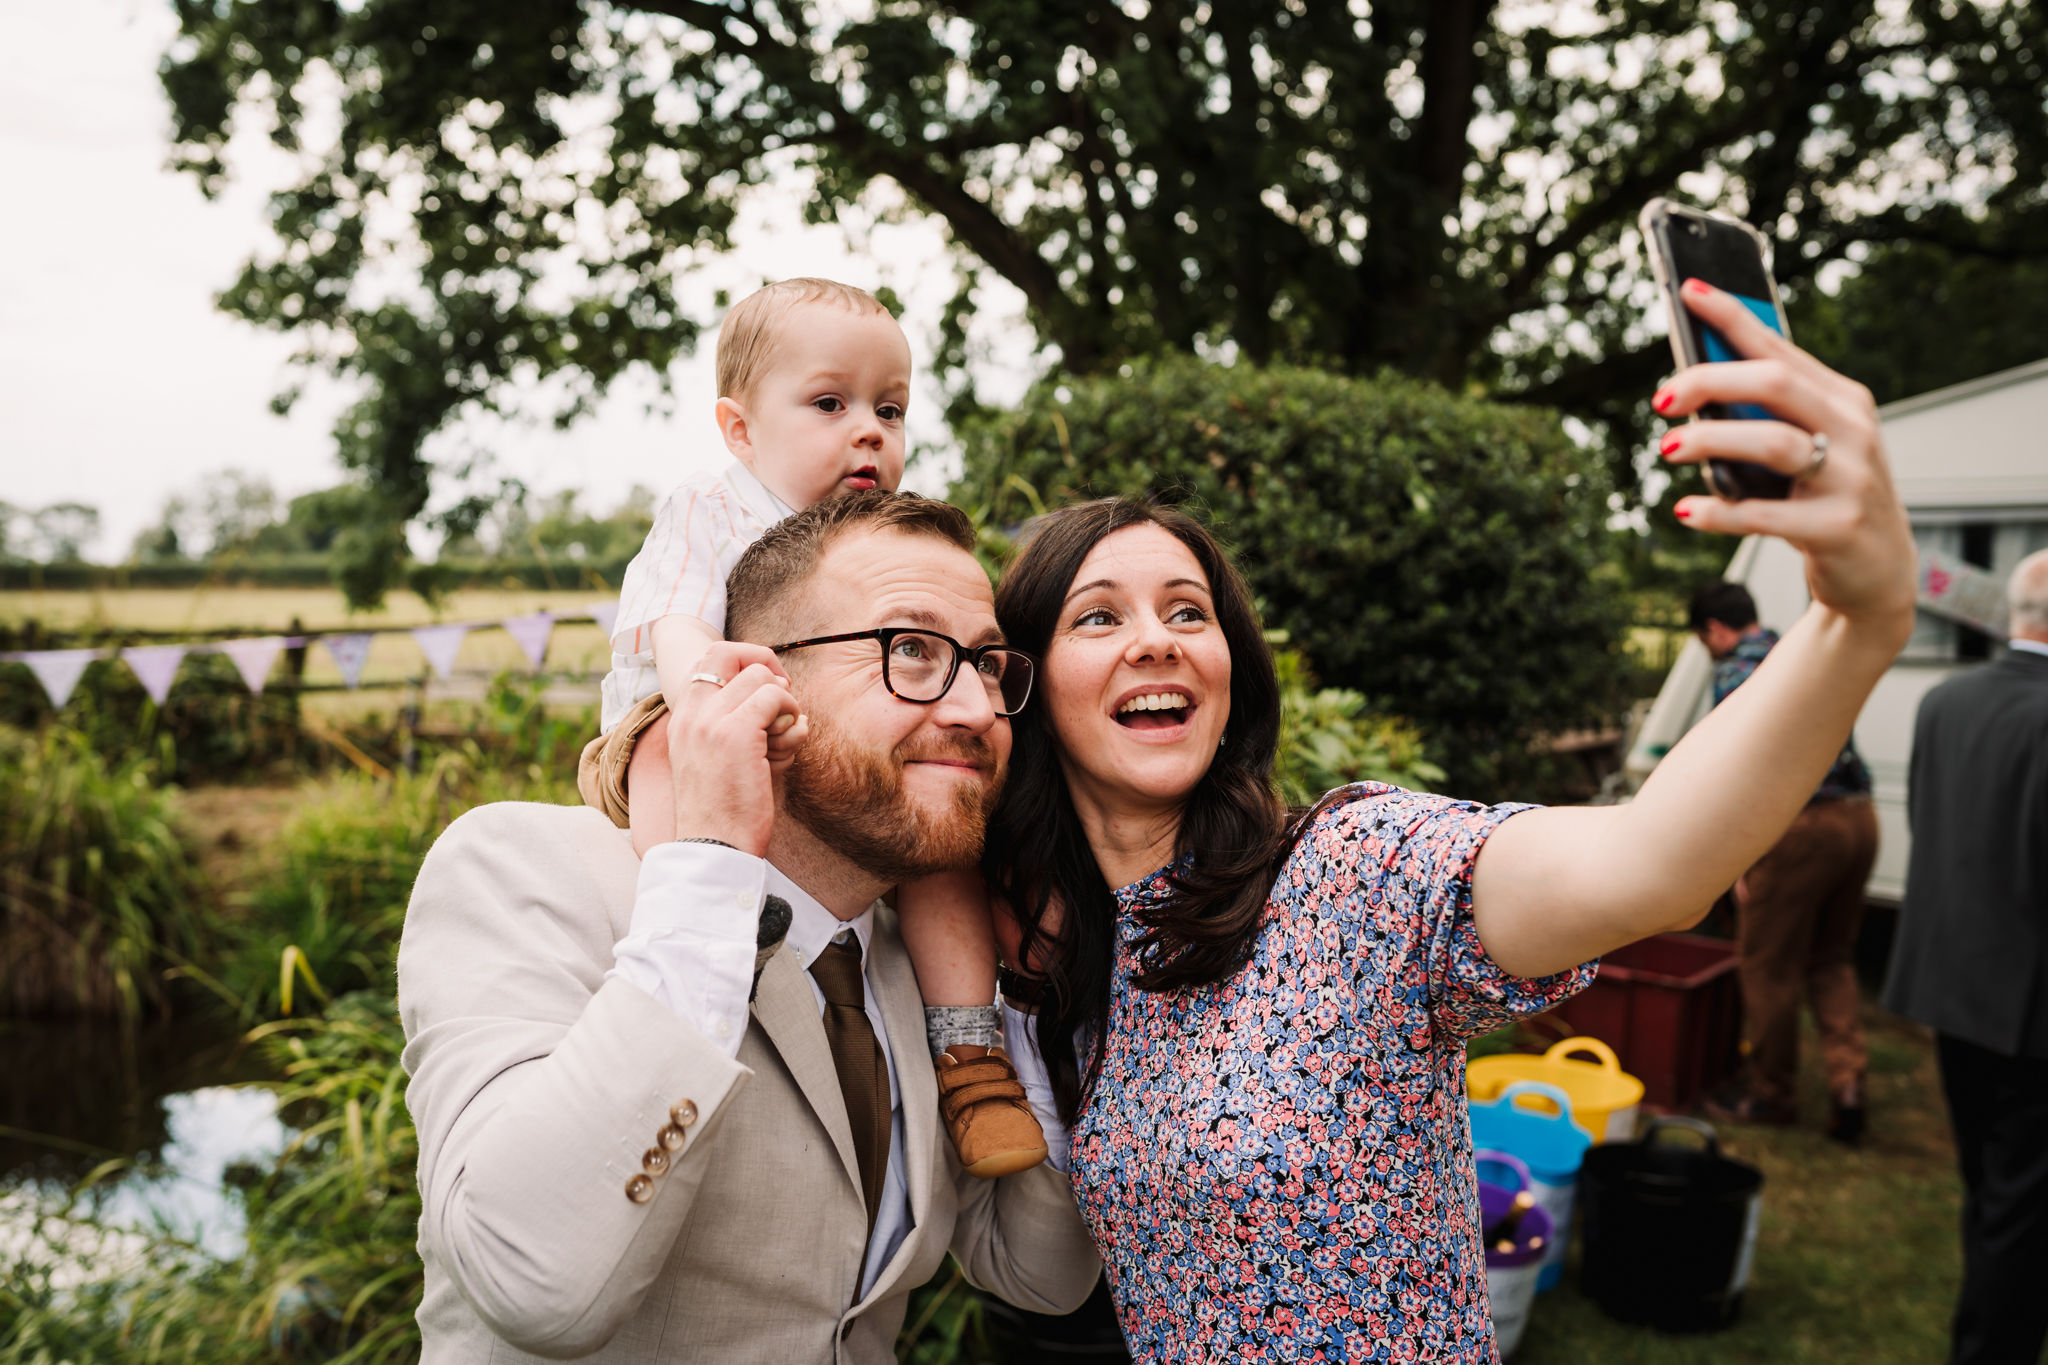 guests photograph themselves during hertfordshire garden party wedding reception